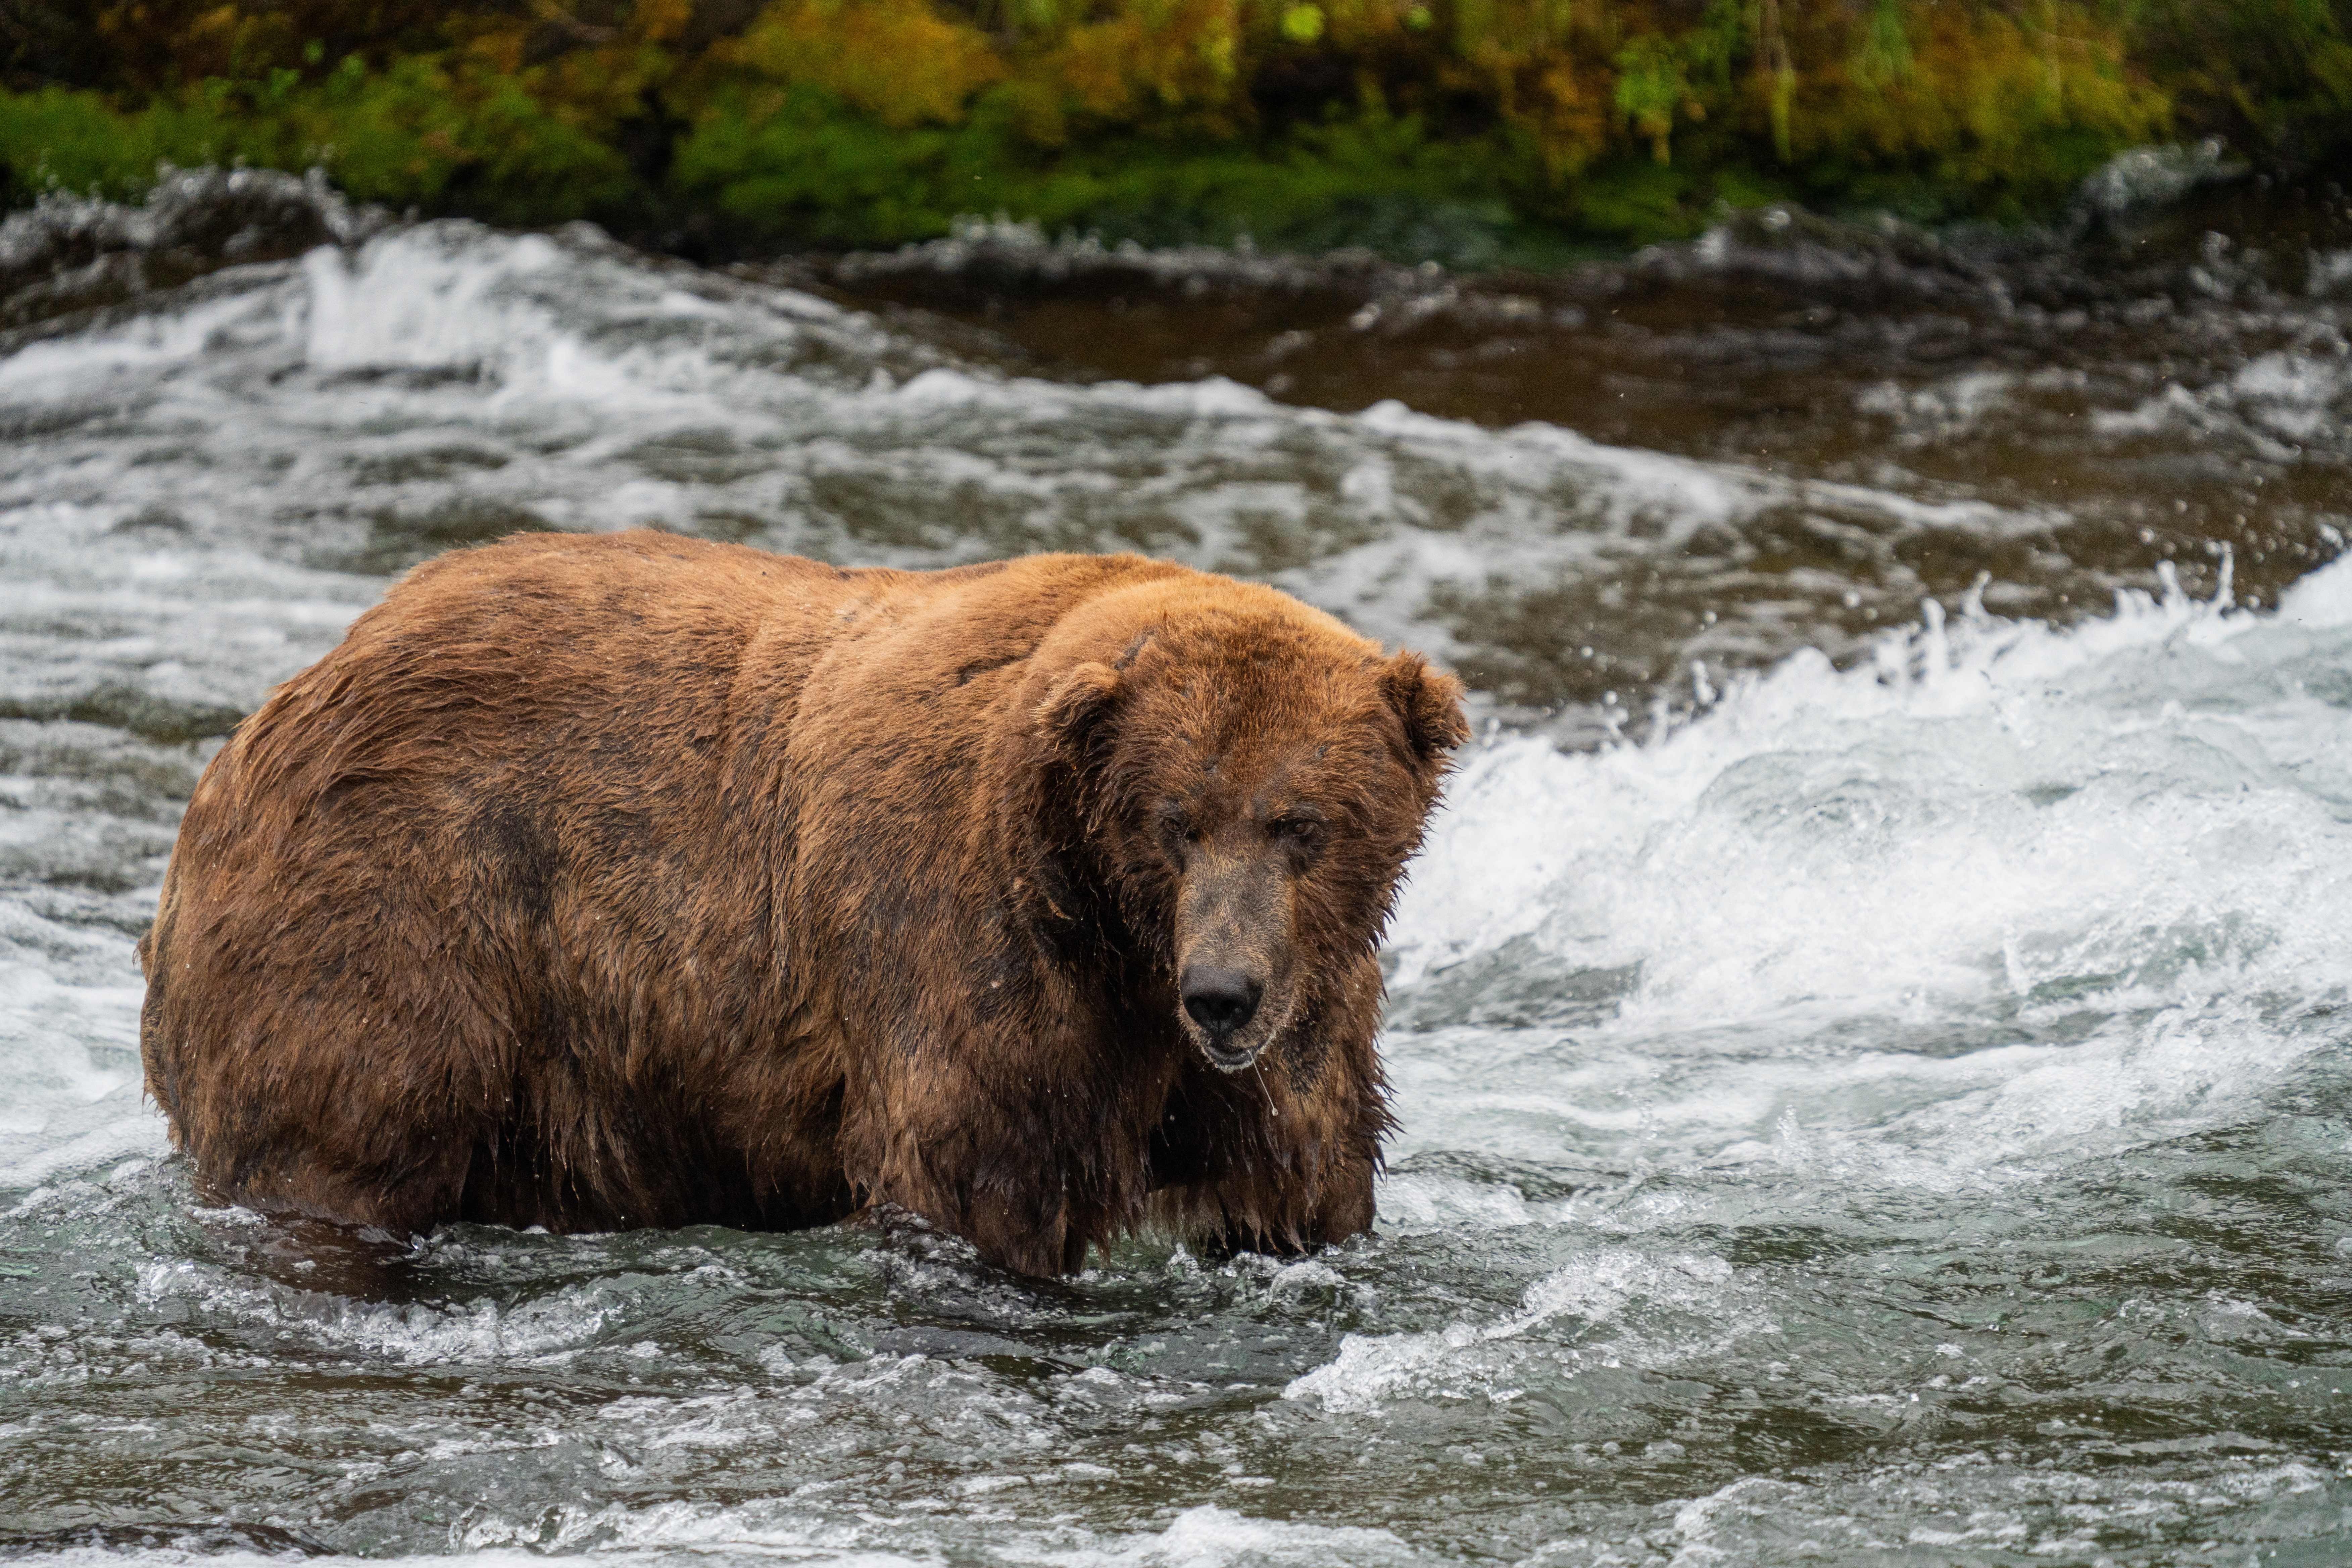 A large brown bear, bear 747, stands in a rushing river.